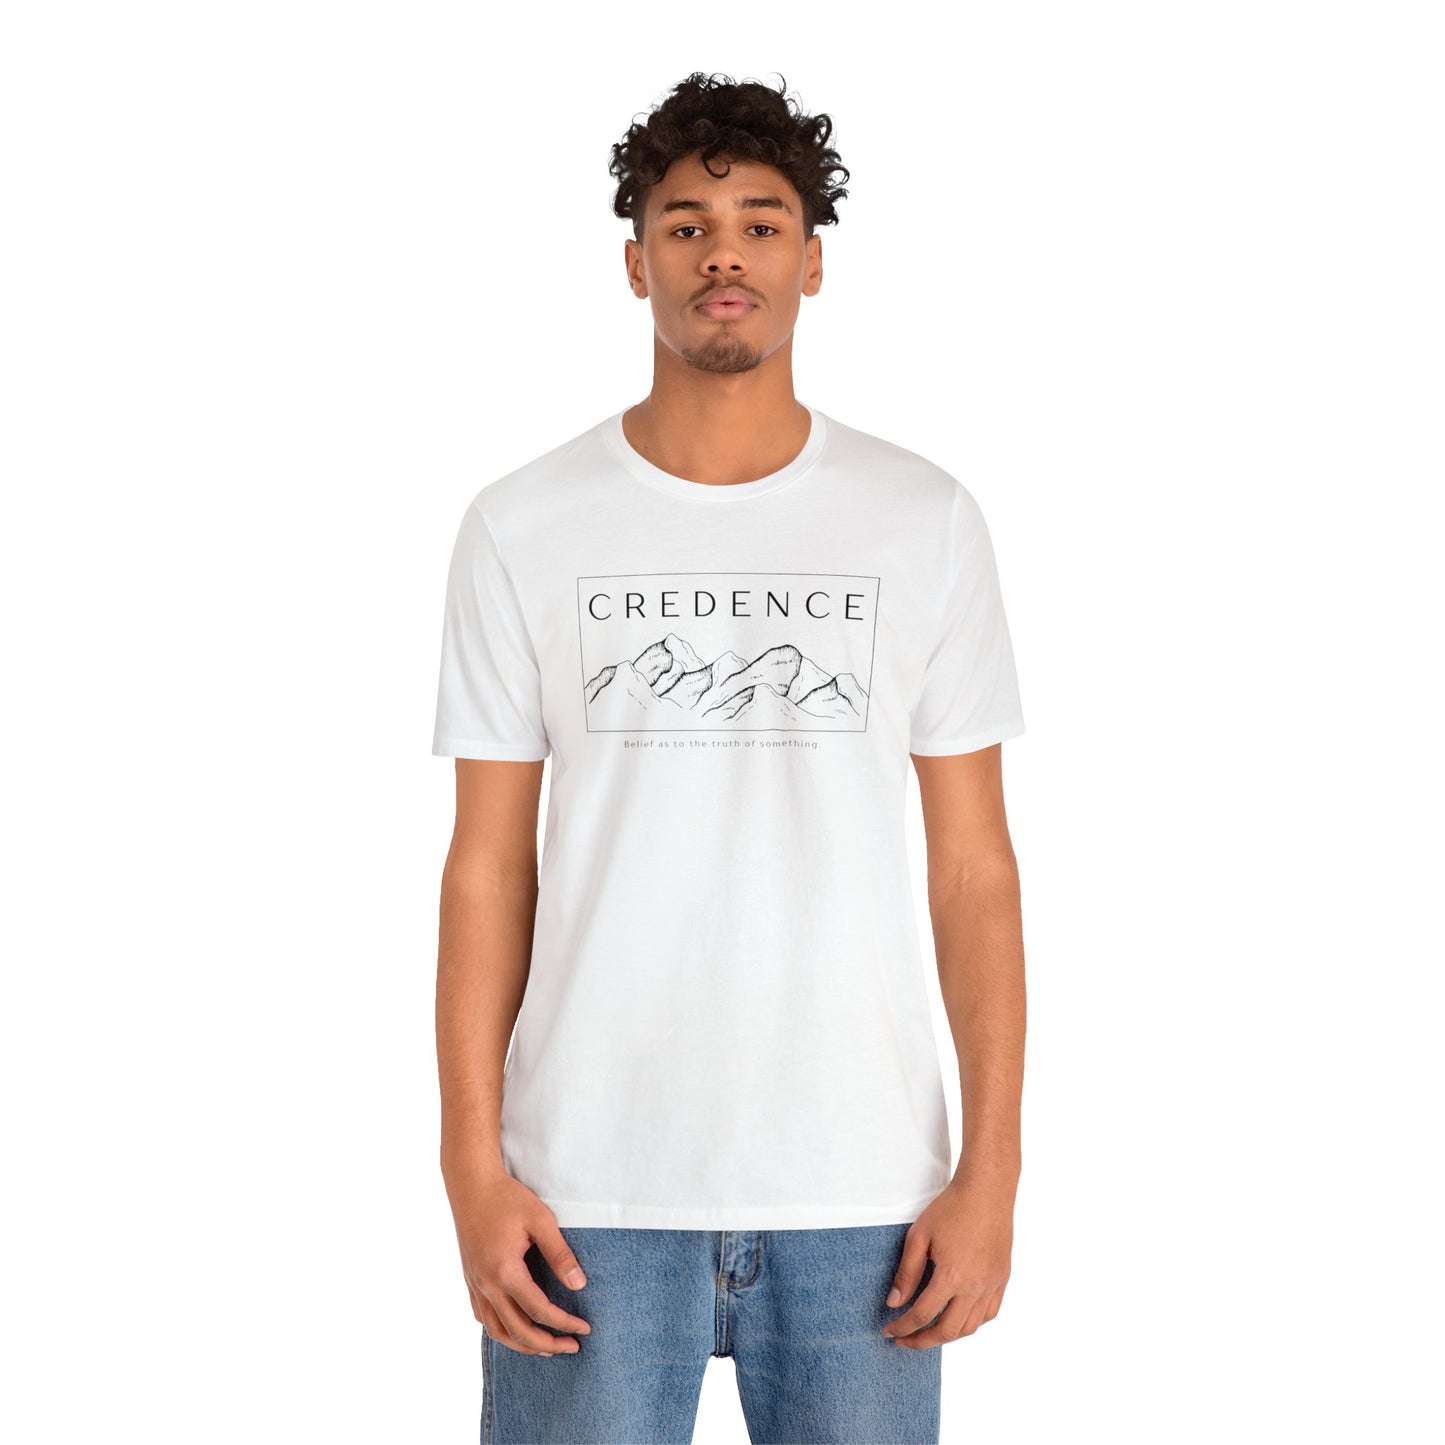 Credence T-Shirt